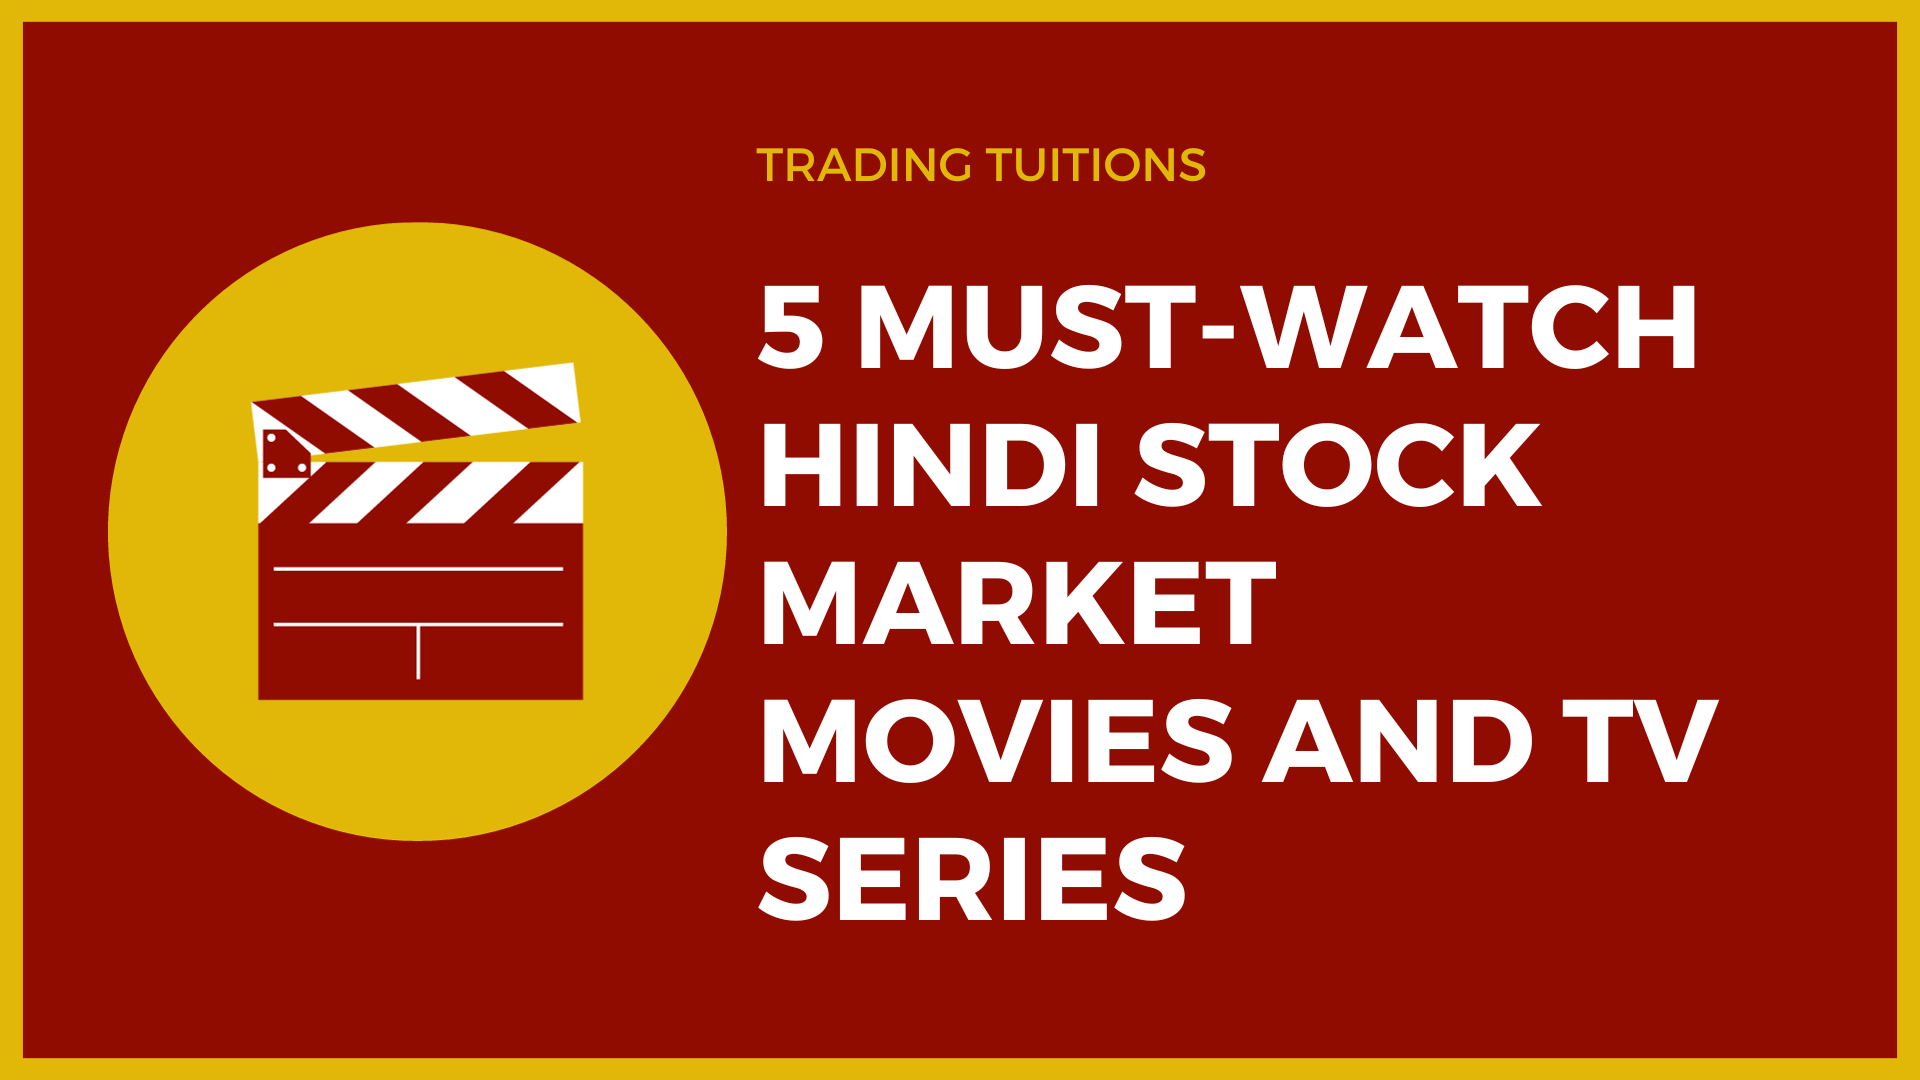 5 Must-Watch Hindi Stock Market Movies and TV Series